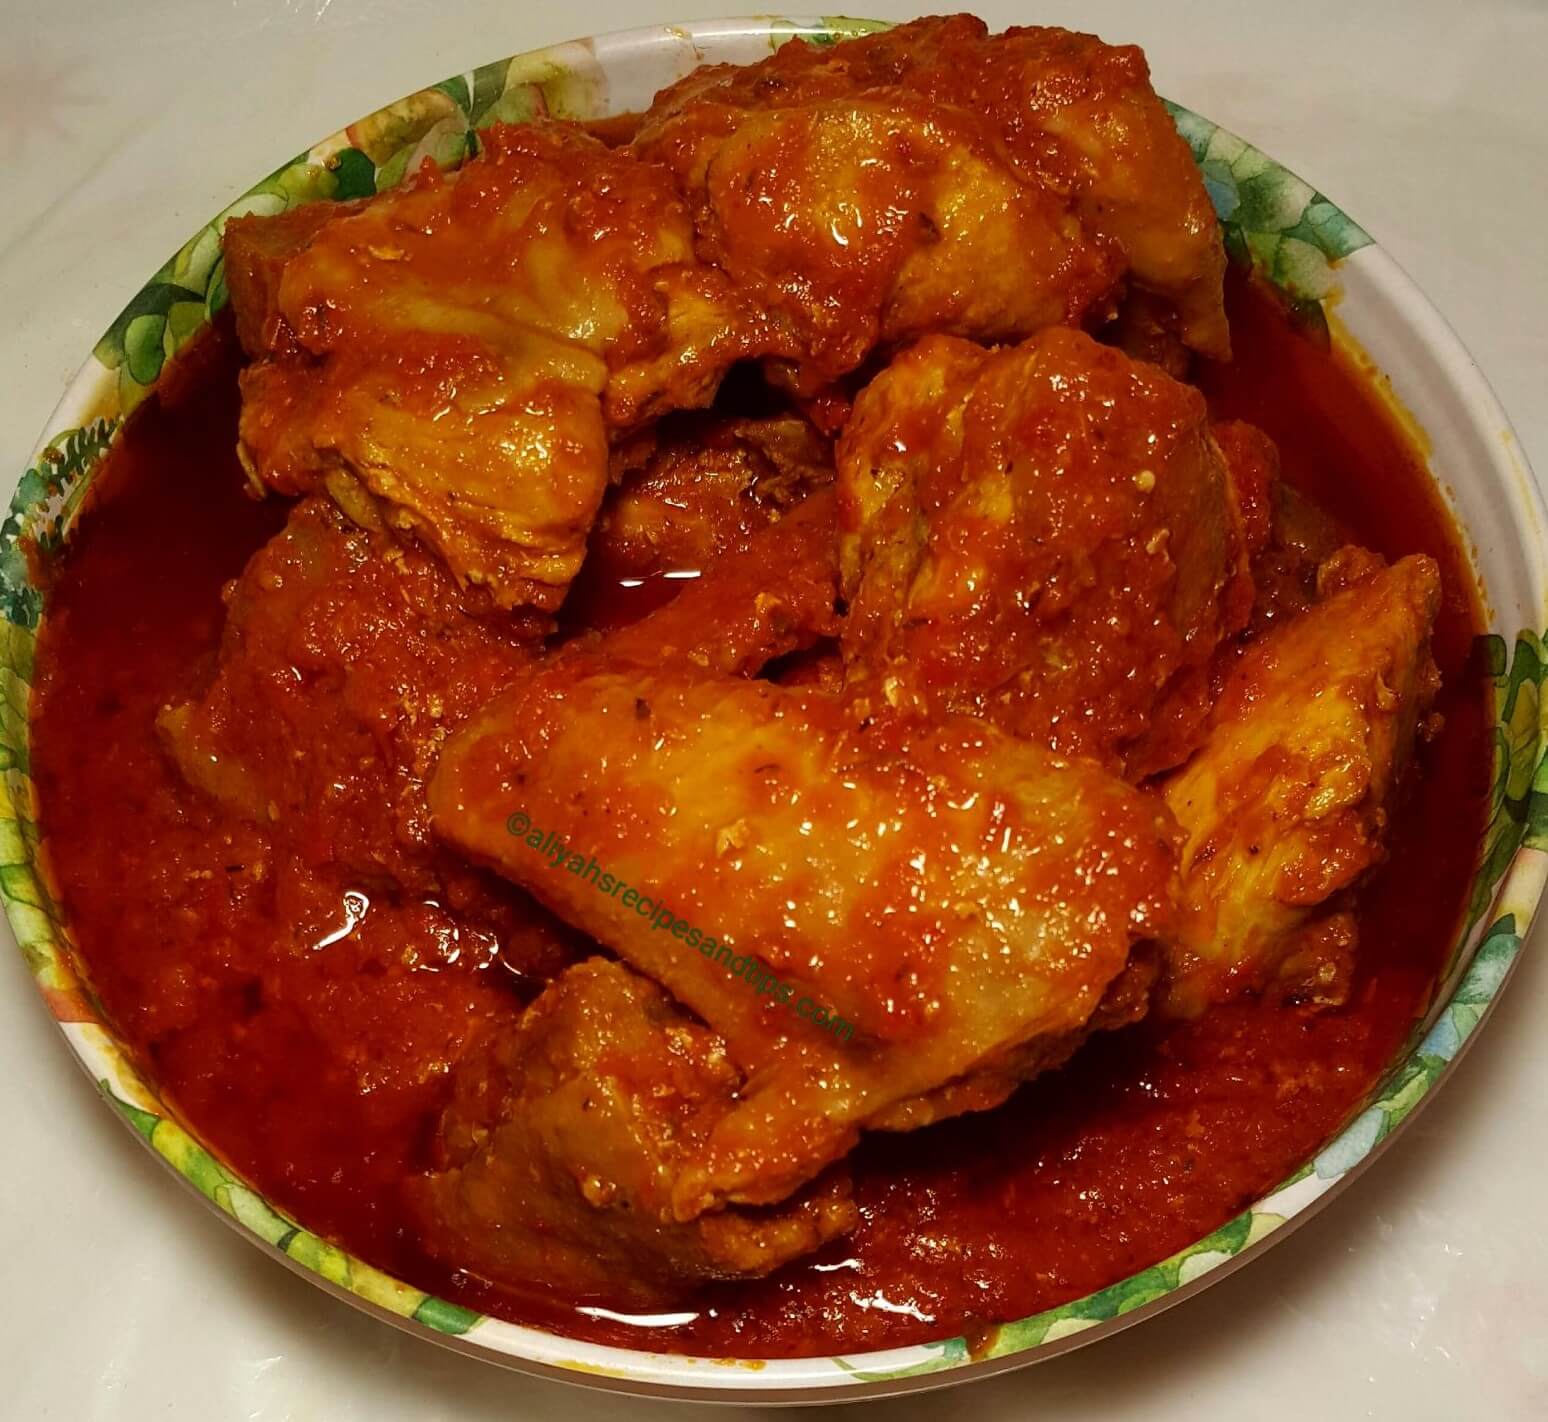 Nigerian chicken stew, Nigerian chicken stew with roasted pepper, tomatoes, recipe, rice, cowleg, spinach, white rice, spicy, tomato paste, food, tomato sauce, baked, pepper, Nigerian chicken stew, how to make African chicken stew, Chicken, stew, African, hen stew, Hard chicken stew, how to make Nigerian chicken stew